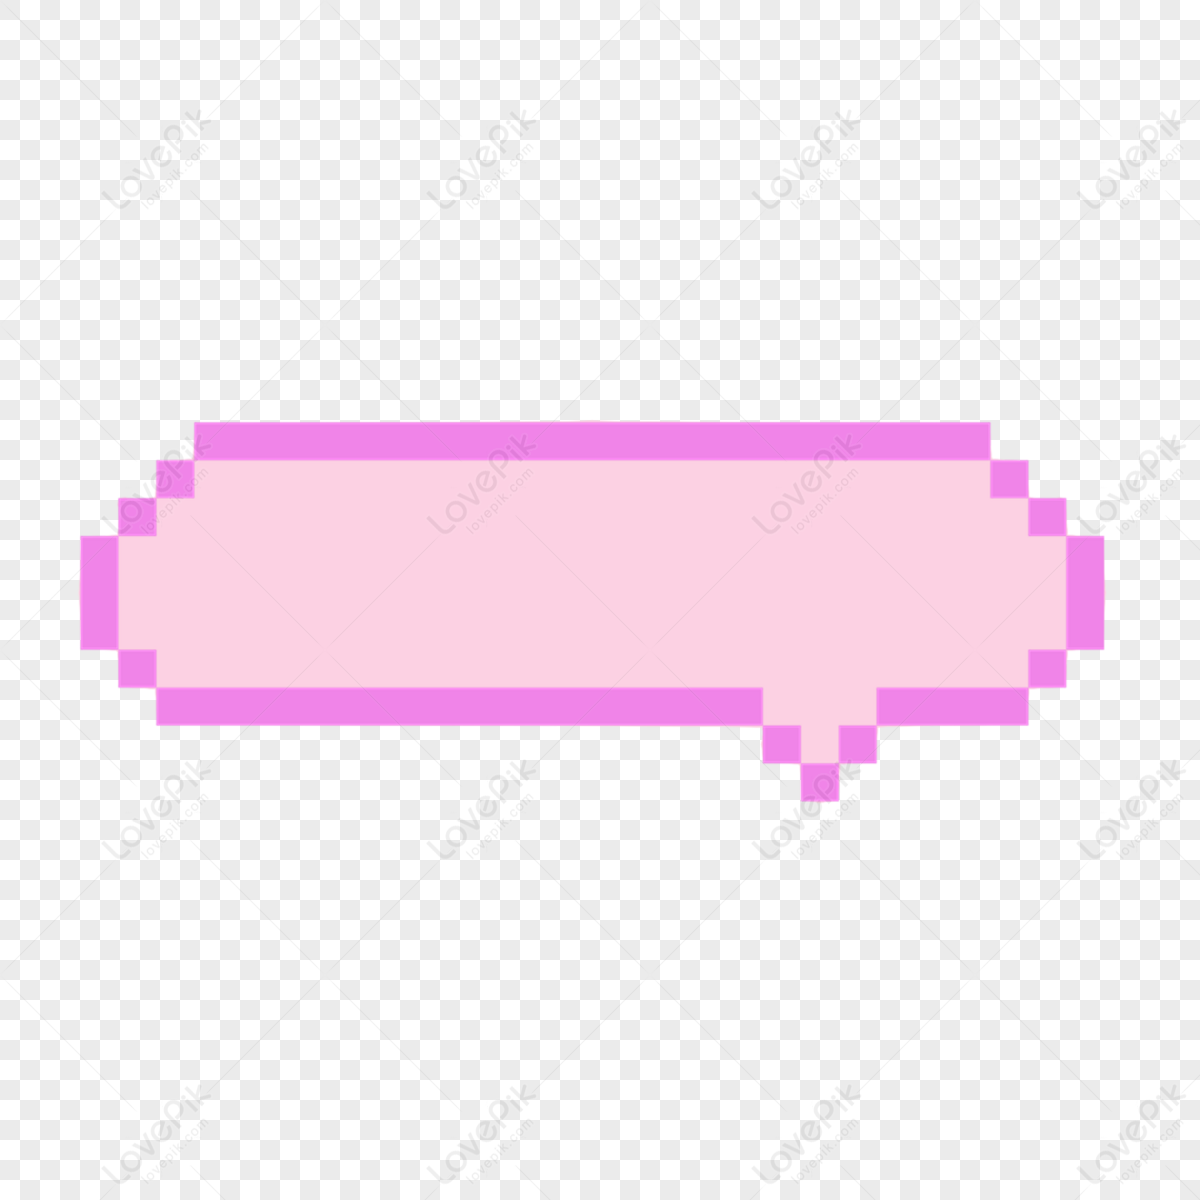 Purple Pink Pixel Art Box Dialog,text Box,strip PNG Image And Clipart ...